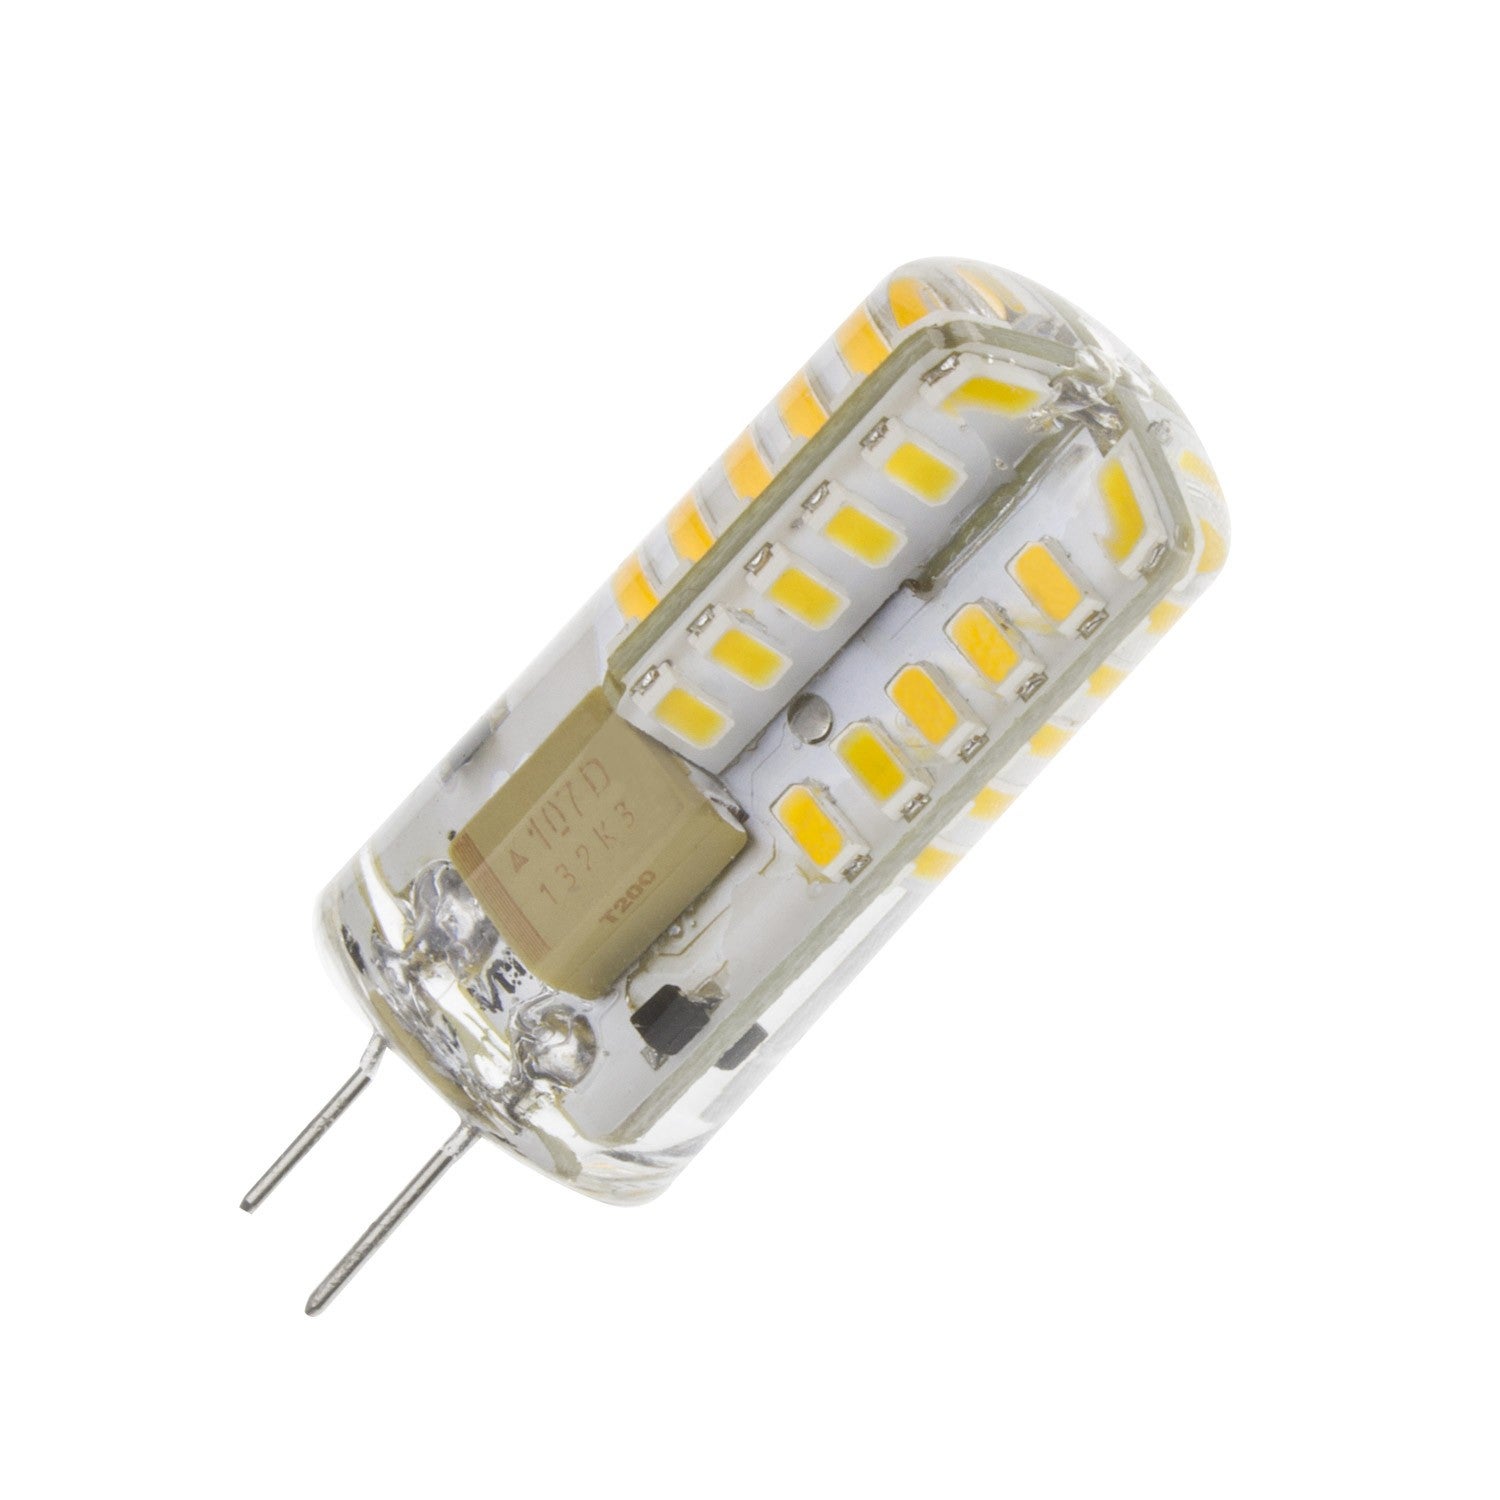 AMPOULE LED 12V 3W G4 Blanc froid